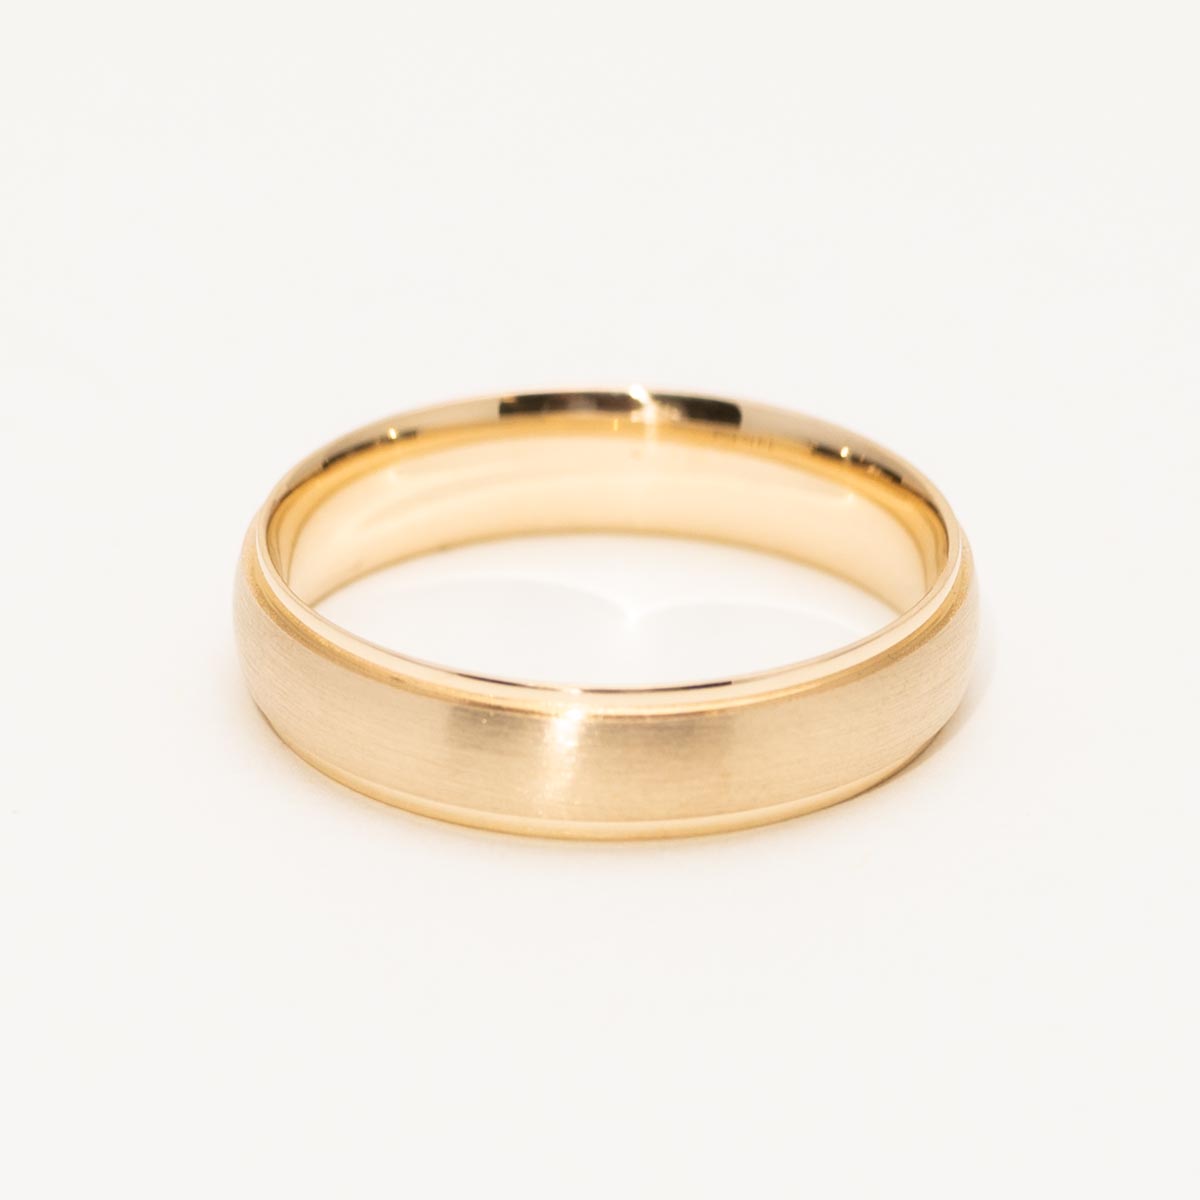 Mens Satin Finish Wedding Band in 14kt Yellow Gold (5mm)